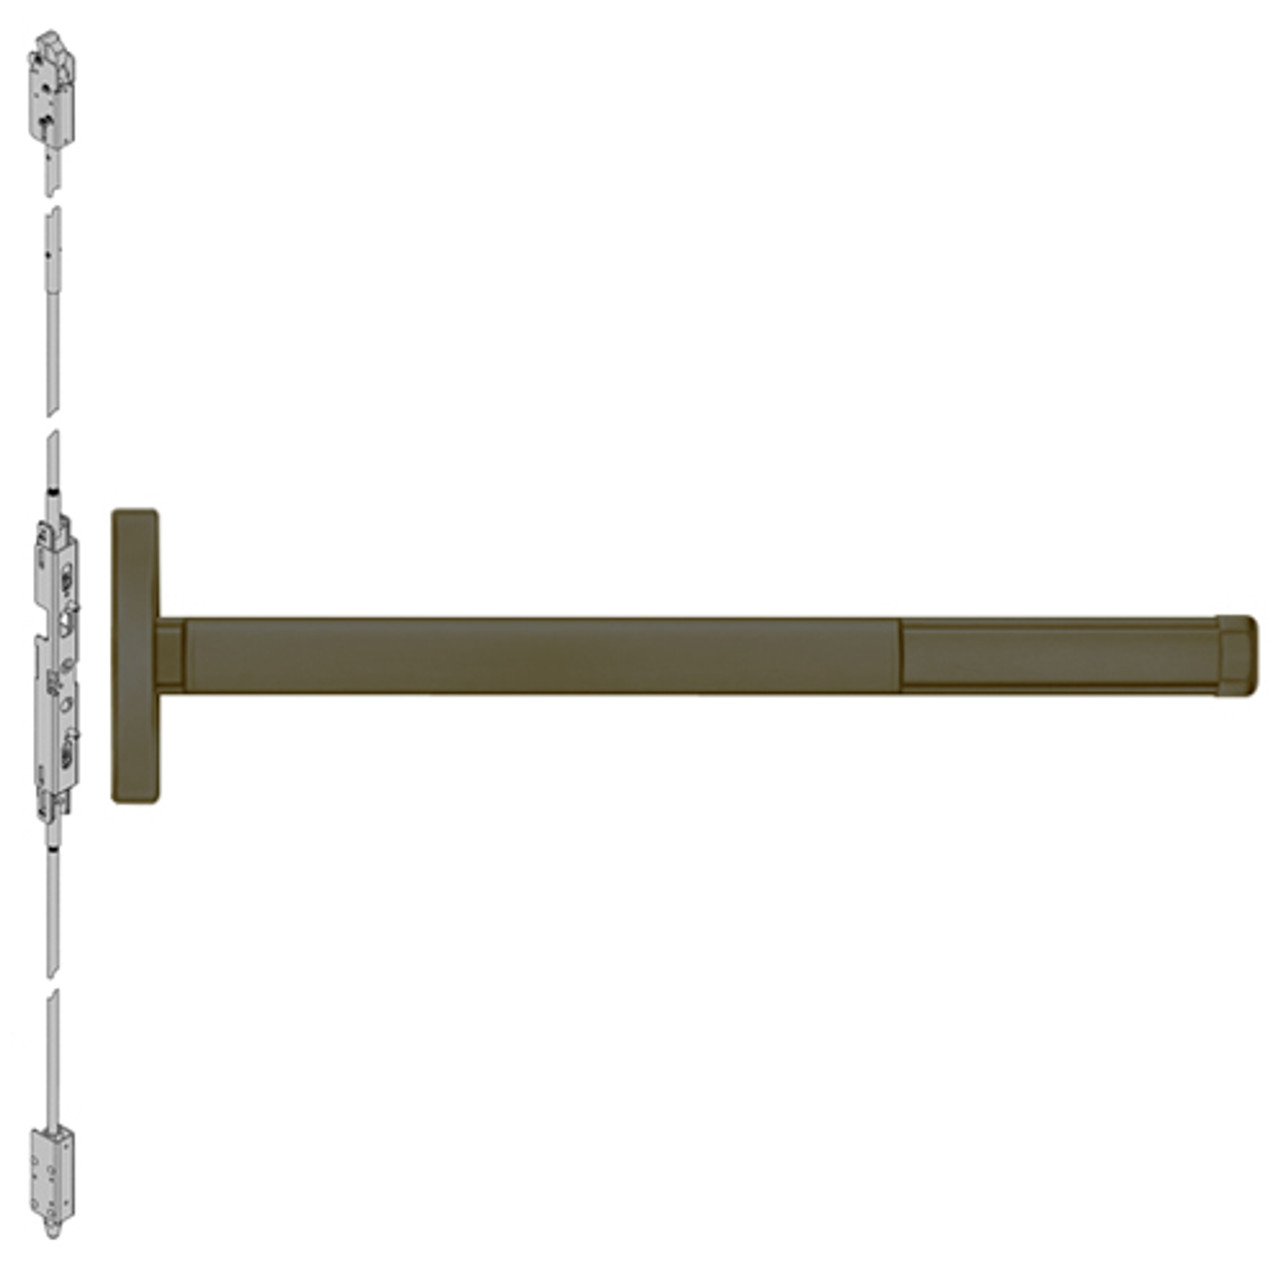 2603CD-613-48 PHI 2600 Series Non Fire Rated Concealed Vertical Rod Exit Device Prepped for Key Retracts Latchbolt with Cylinder Dogging in Oil Rubbed Bronze Finish